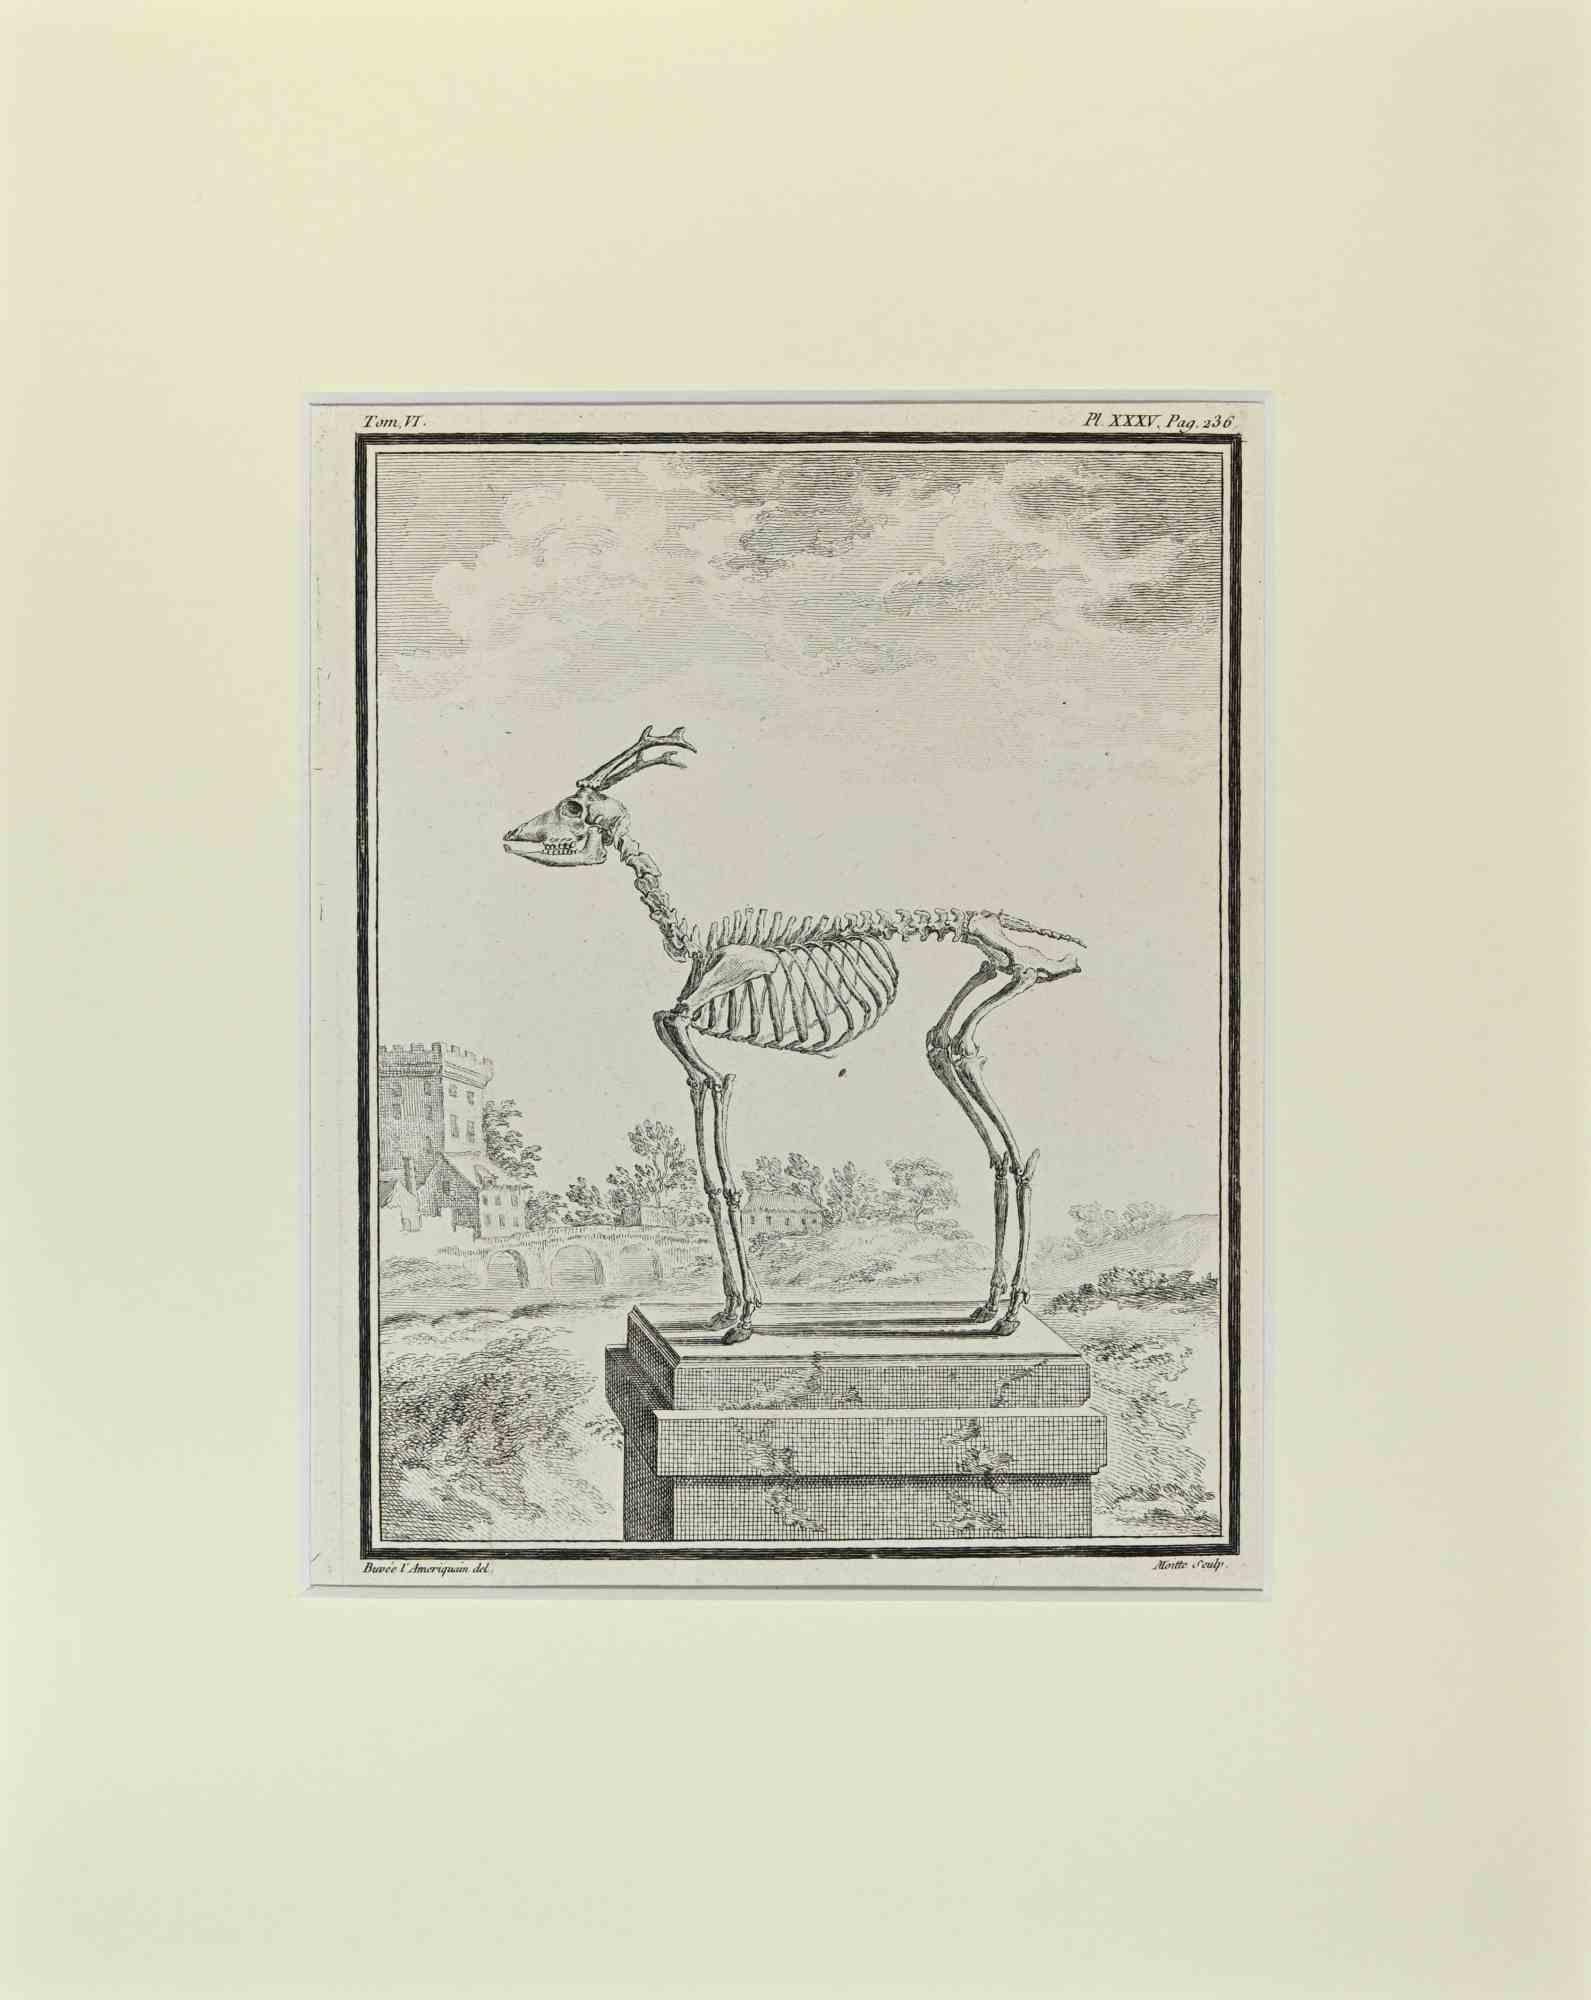 Deer Skeleton is an artwork realized  by  Buvée l'Américain in 1771.  

Etching B./W. print  on ivory paper. Signed on  plate on the lower left margin.

The work is glued on cardboard. Total dimensions: 35x28 cm.

The artwork belongs to the suite